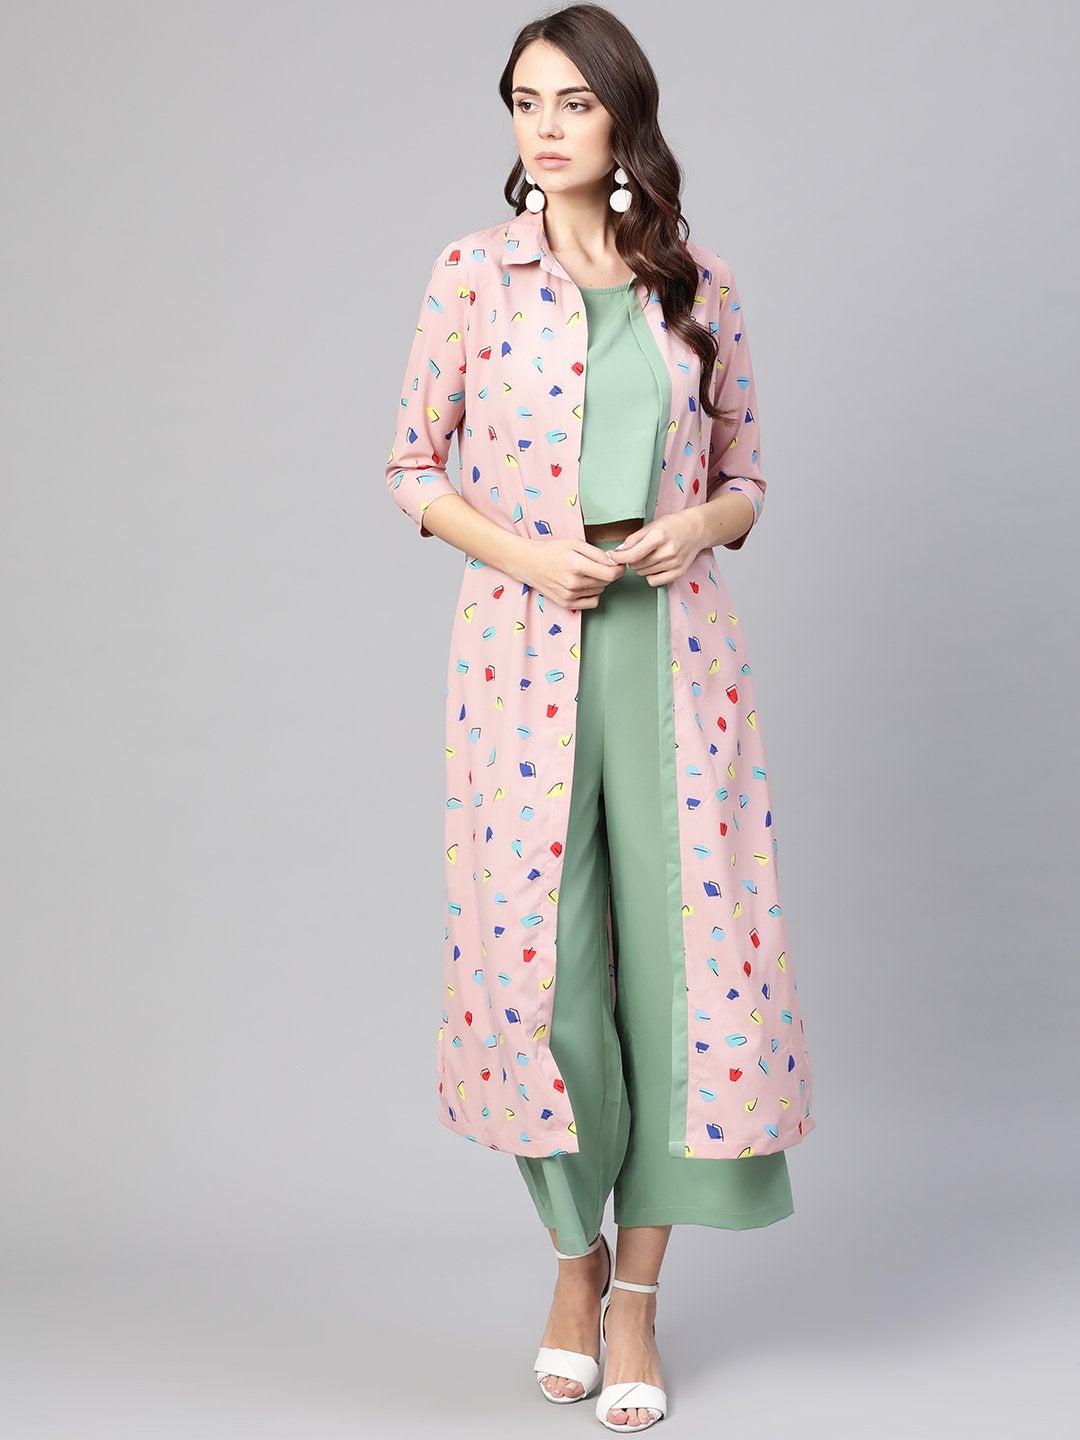 Women's Top With Pants And Printed Long Shrug - Pannkh